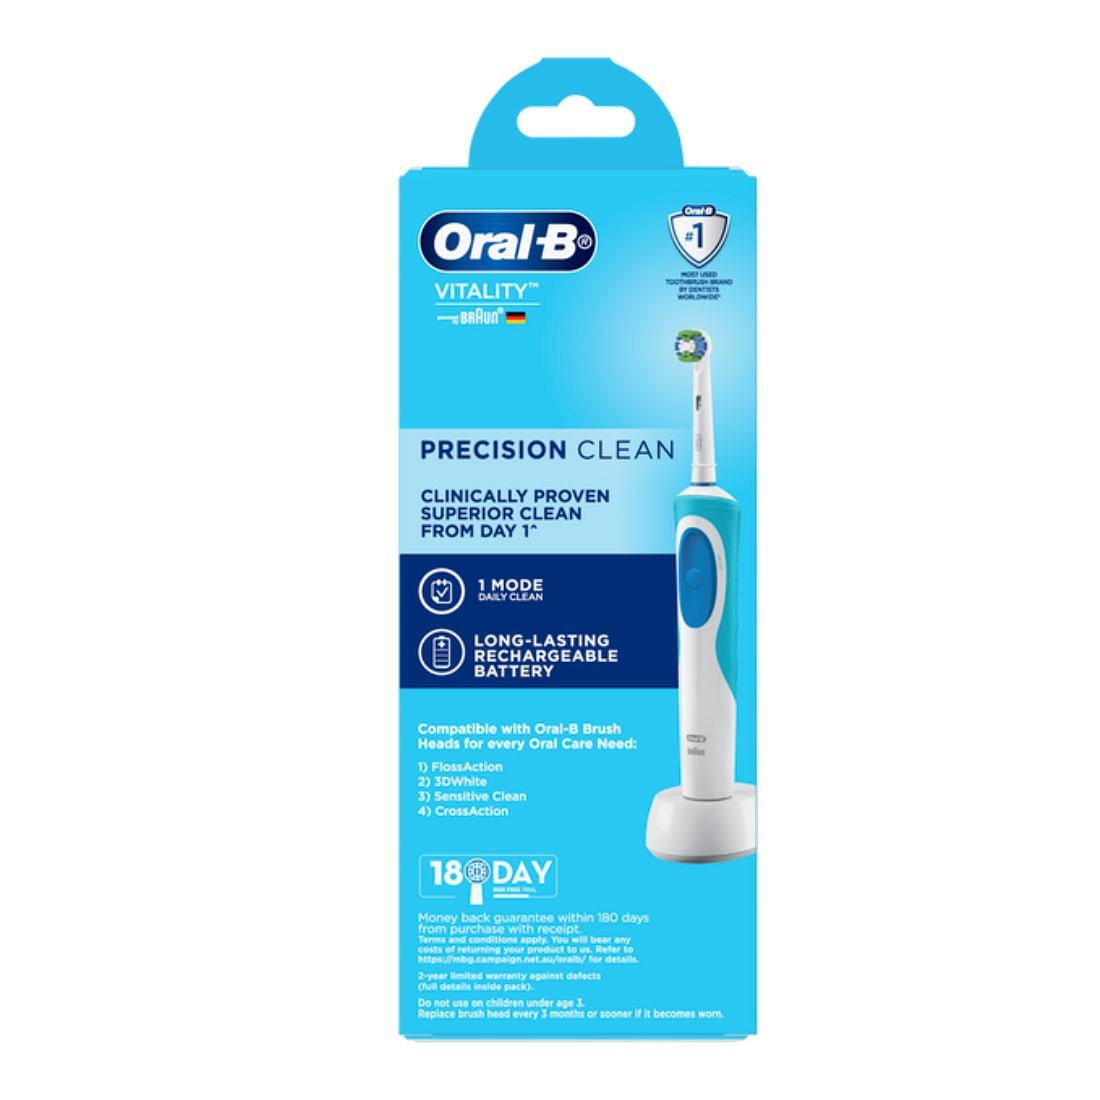 Oral-B Power Toothbrush Vitality Precsion Clean